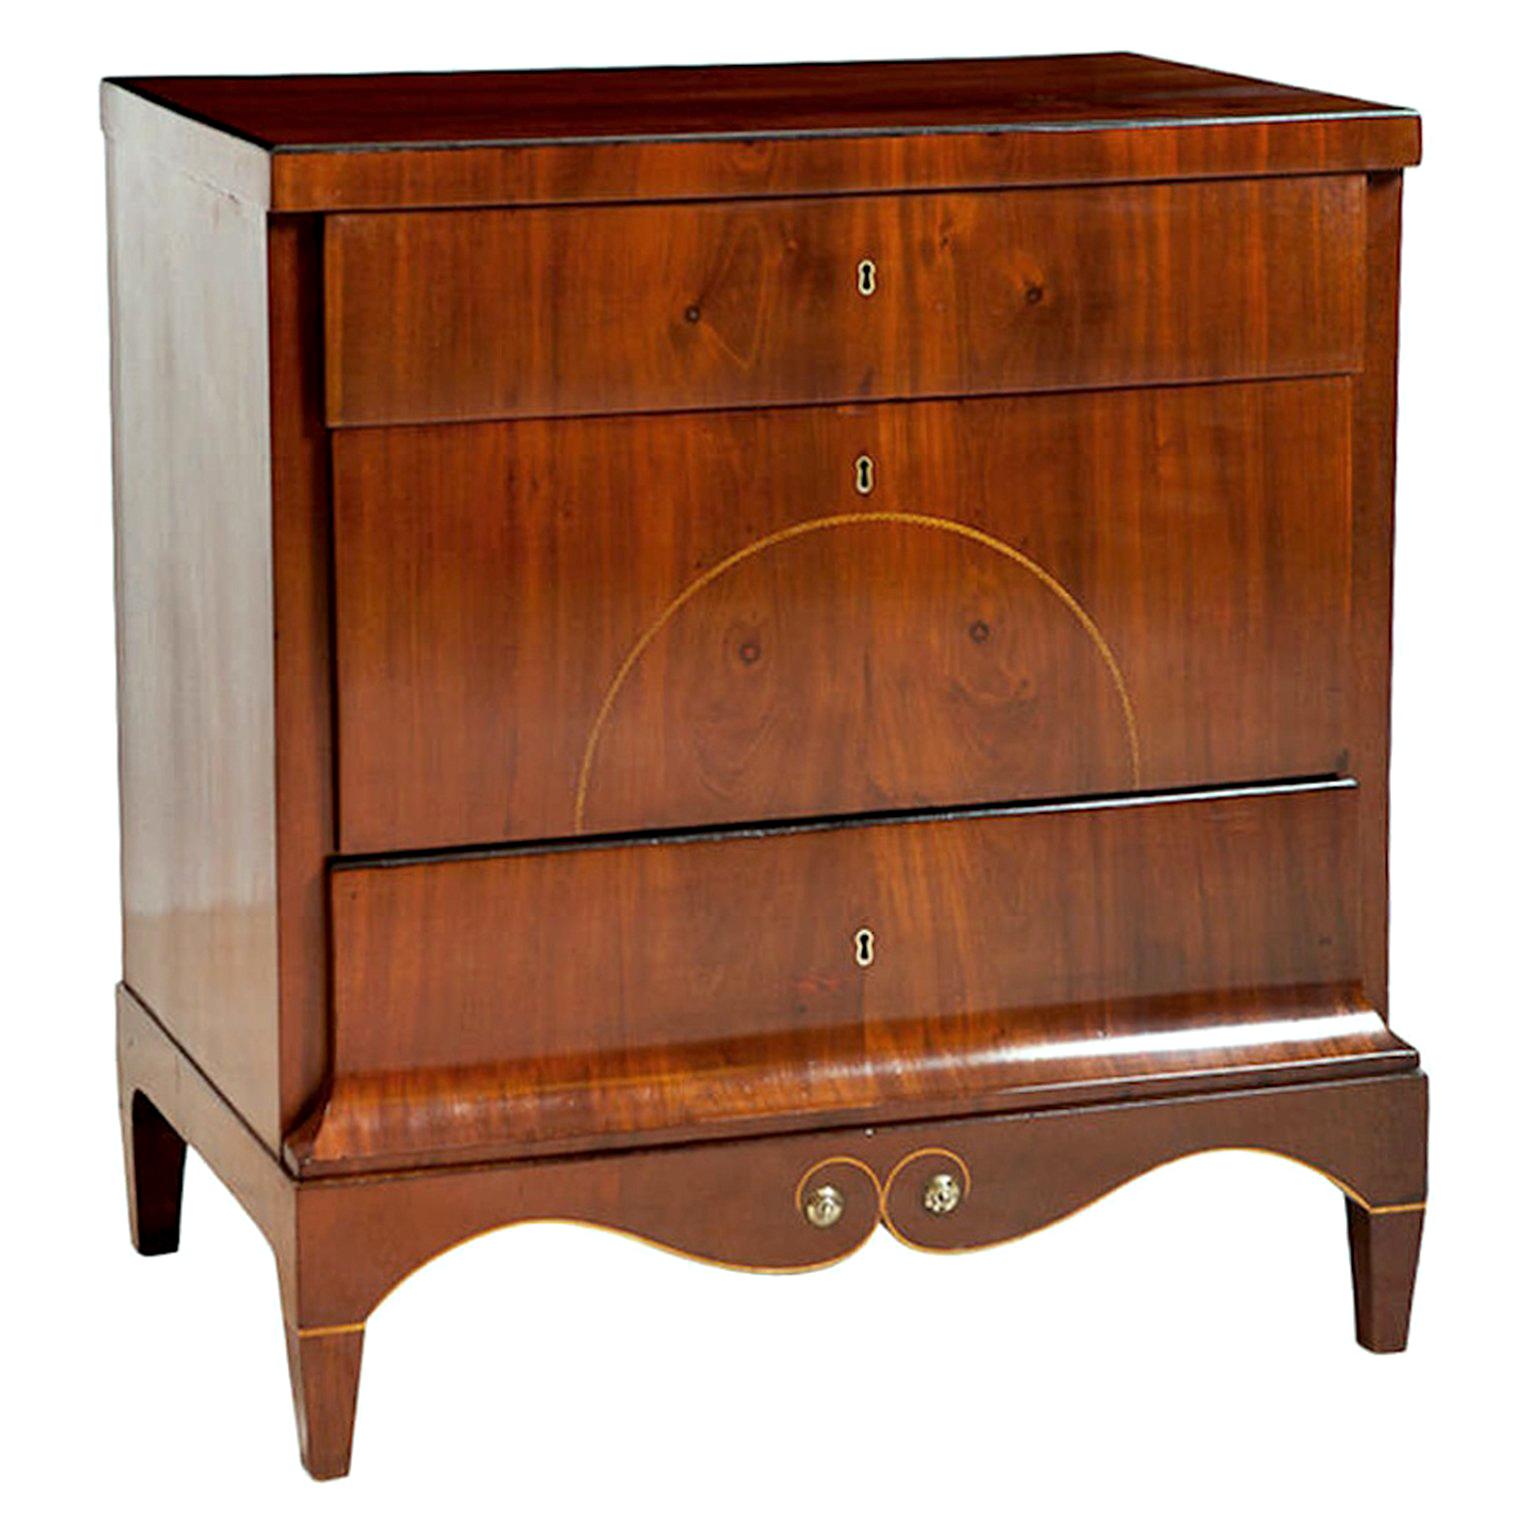 Small Empire Chest of Drawers in Cuban Mahogany, Denmark, circa 1810 For Sale